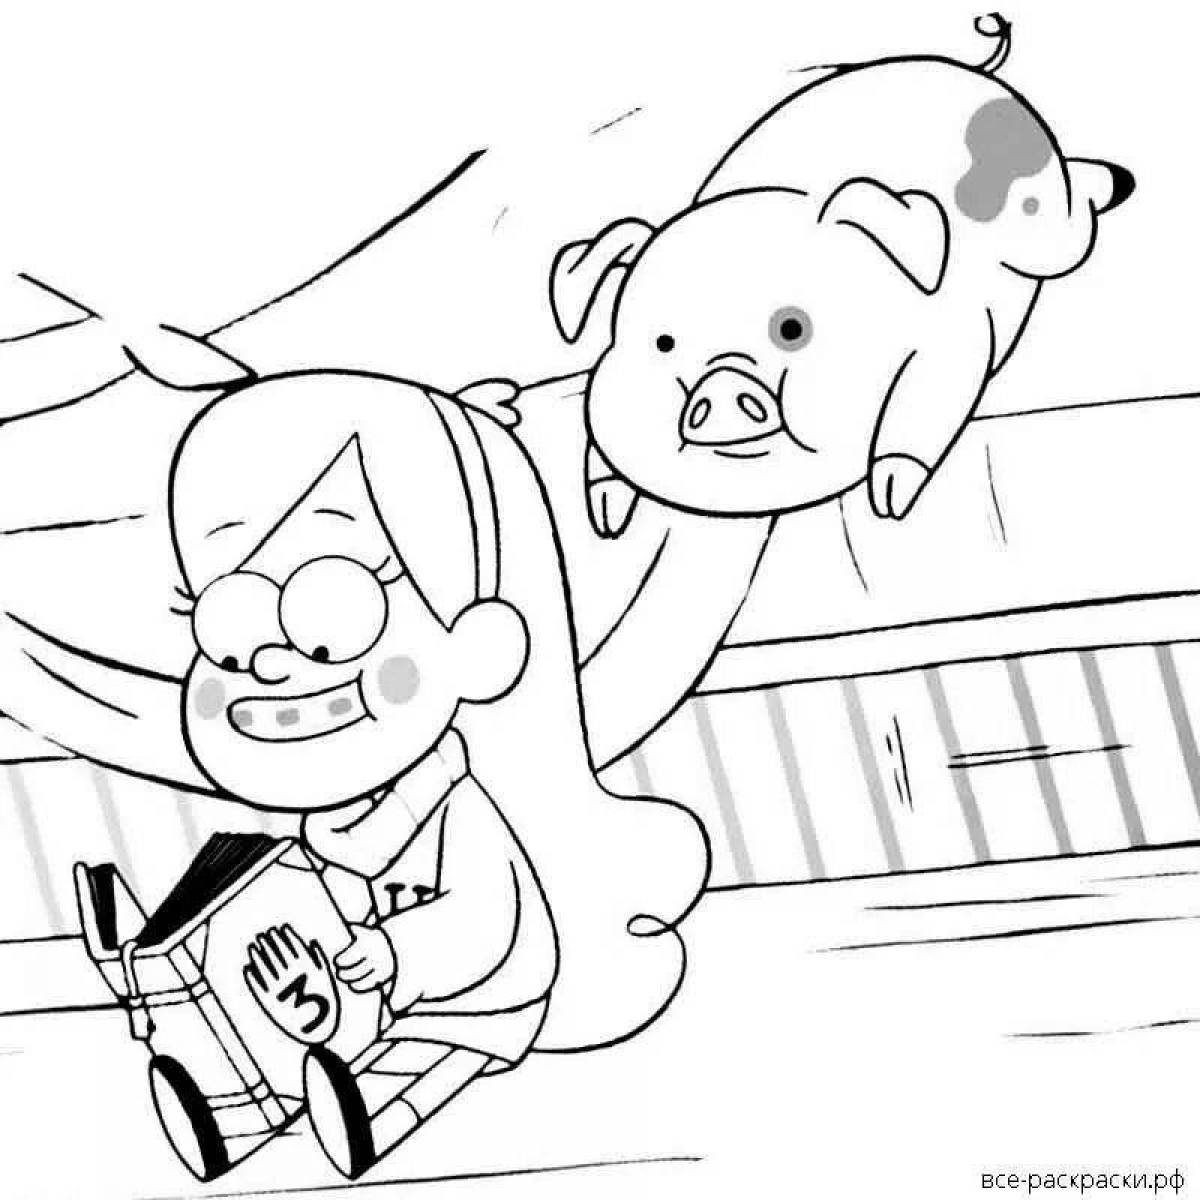 Exciting coloring mabel and chubby